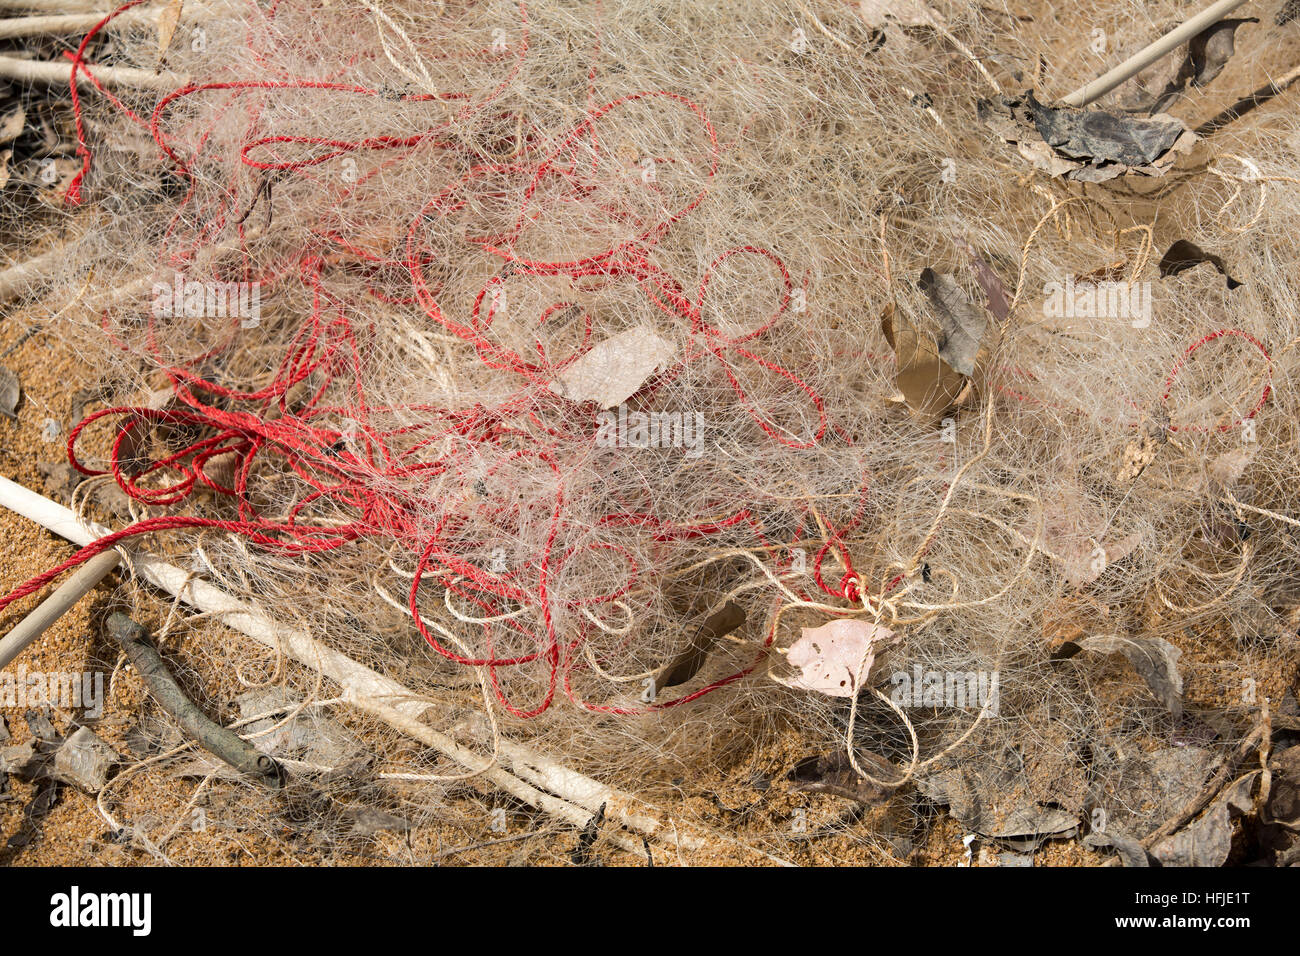 Baro village, Guinea, 1st May 2015: Discarded fine fishing nets. These llegal nets catch the young immature fish before they can become adults. Stock Photo